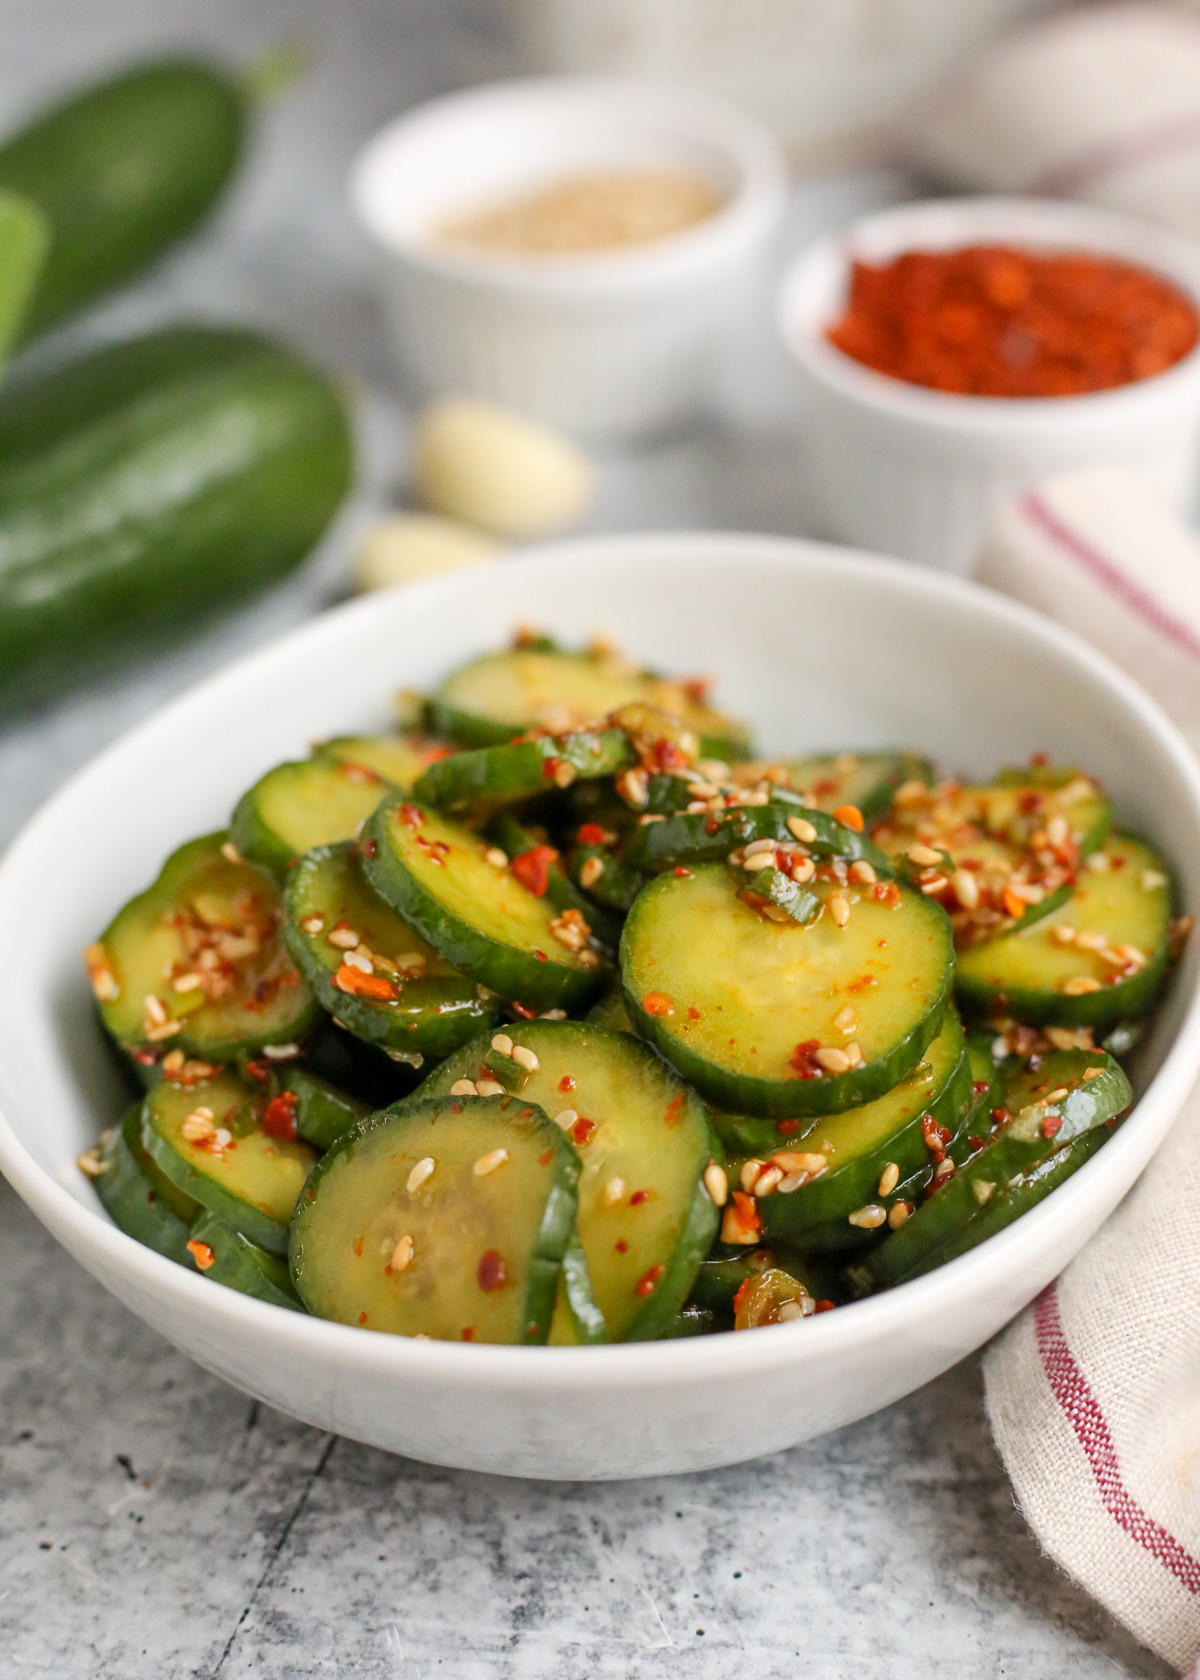 Side angle view of a small white ceramic dish filled with sliced cucumbers, seasoned and garnished with toasted sesame seeds and small red pepper flakes